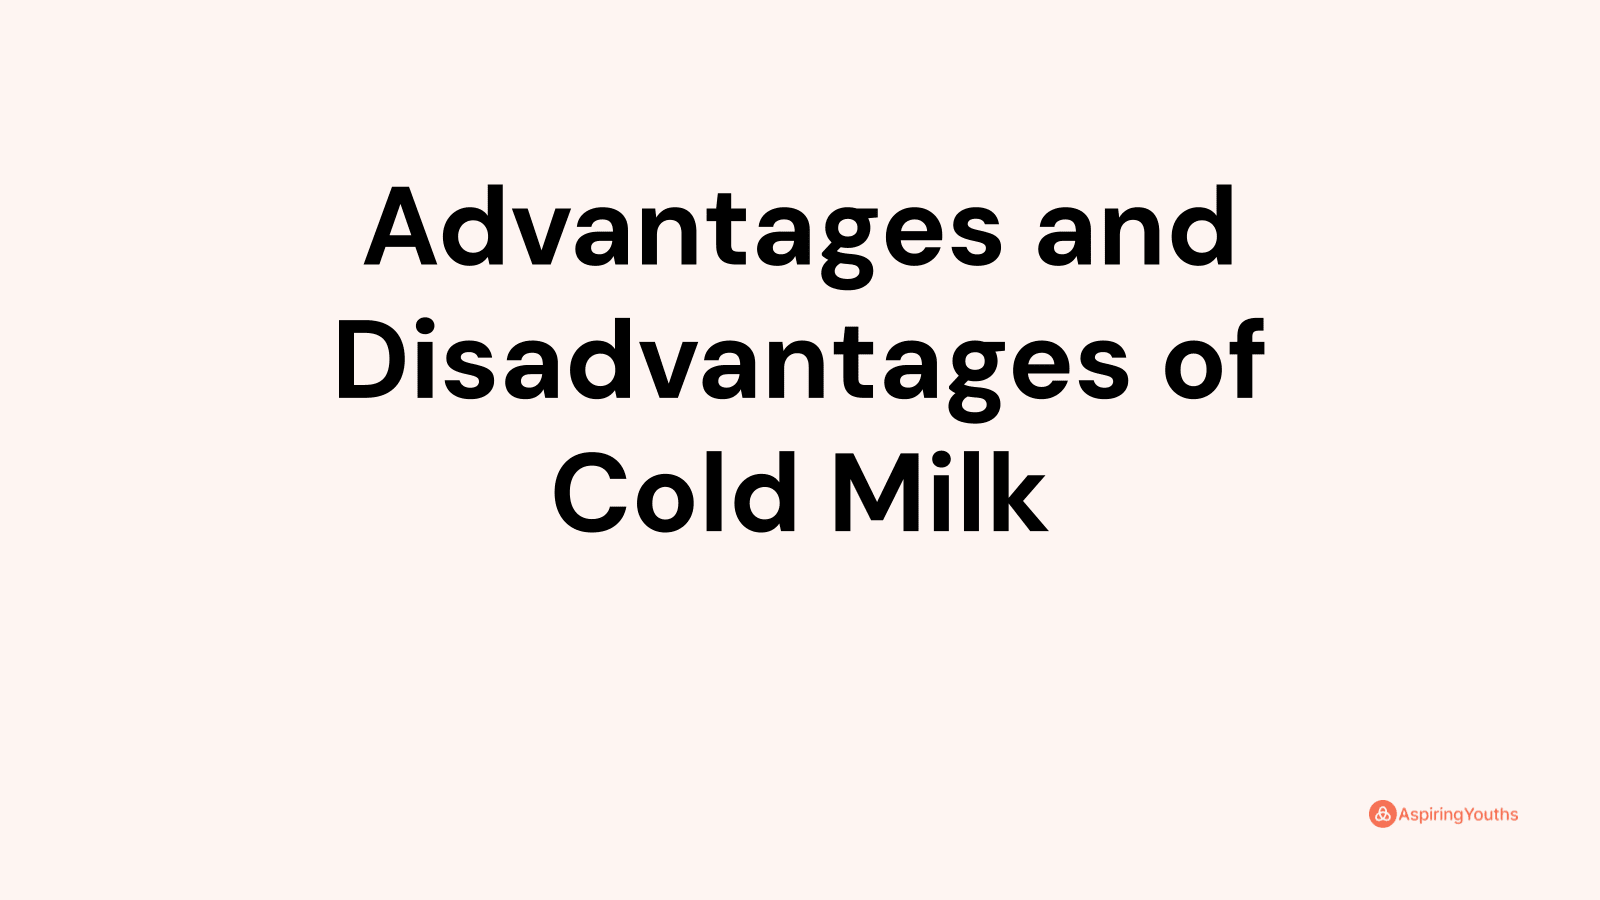 Advantages and Disadvantages of Cold Milk